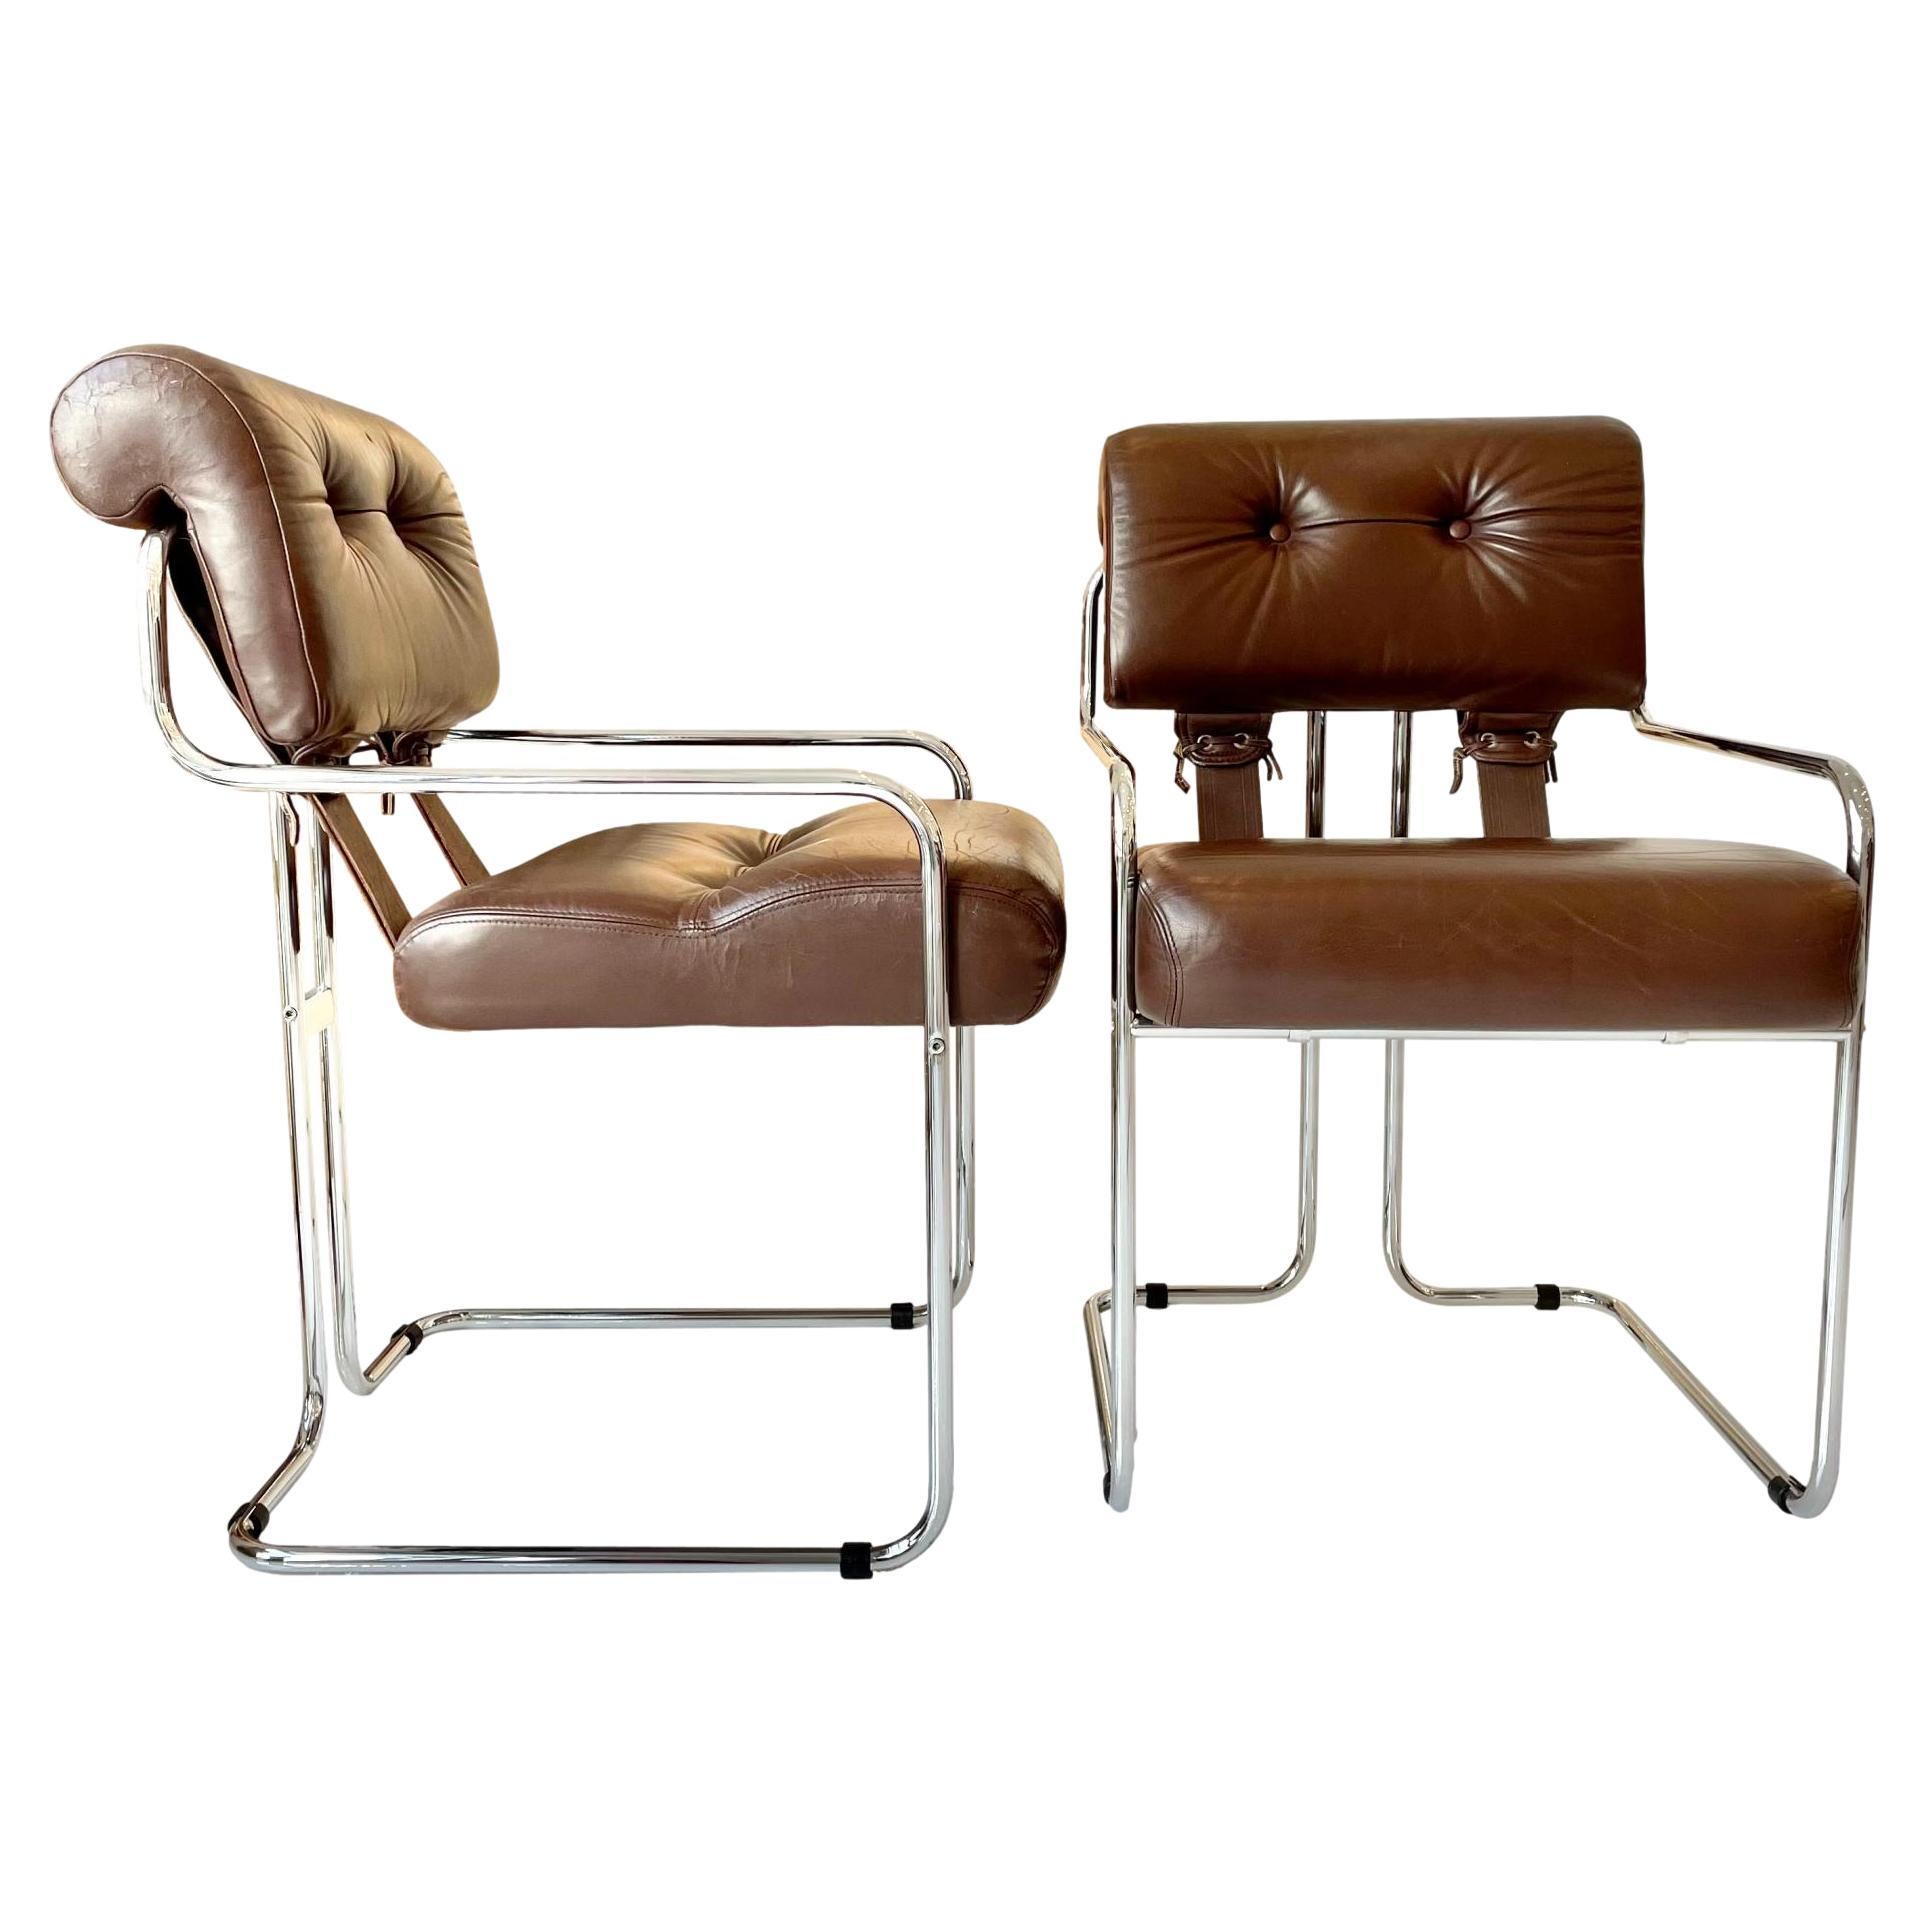 Tucroma Chair in Brown Leather by Guido Faleschini